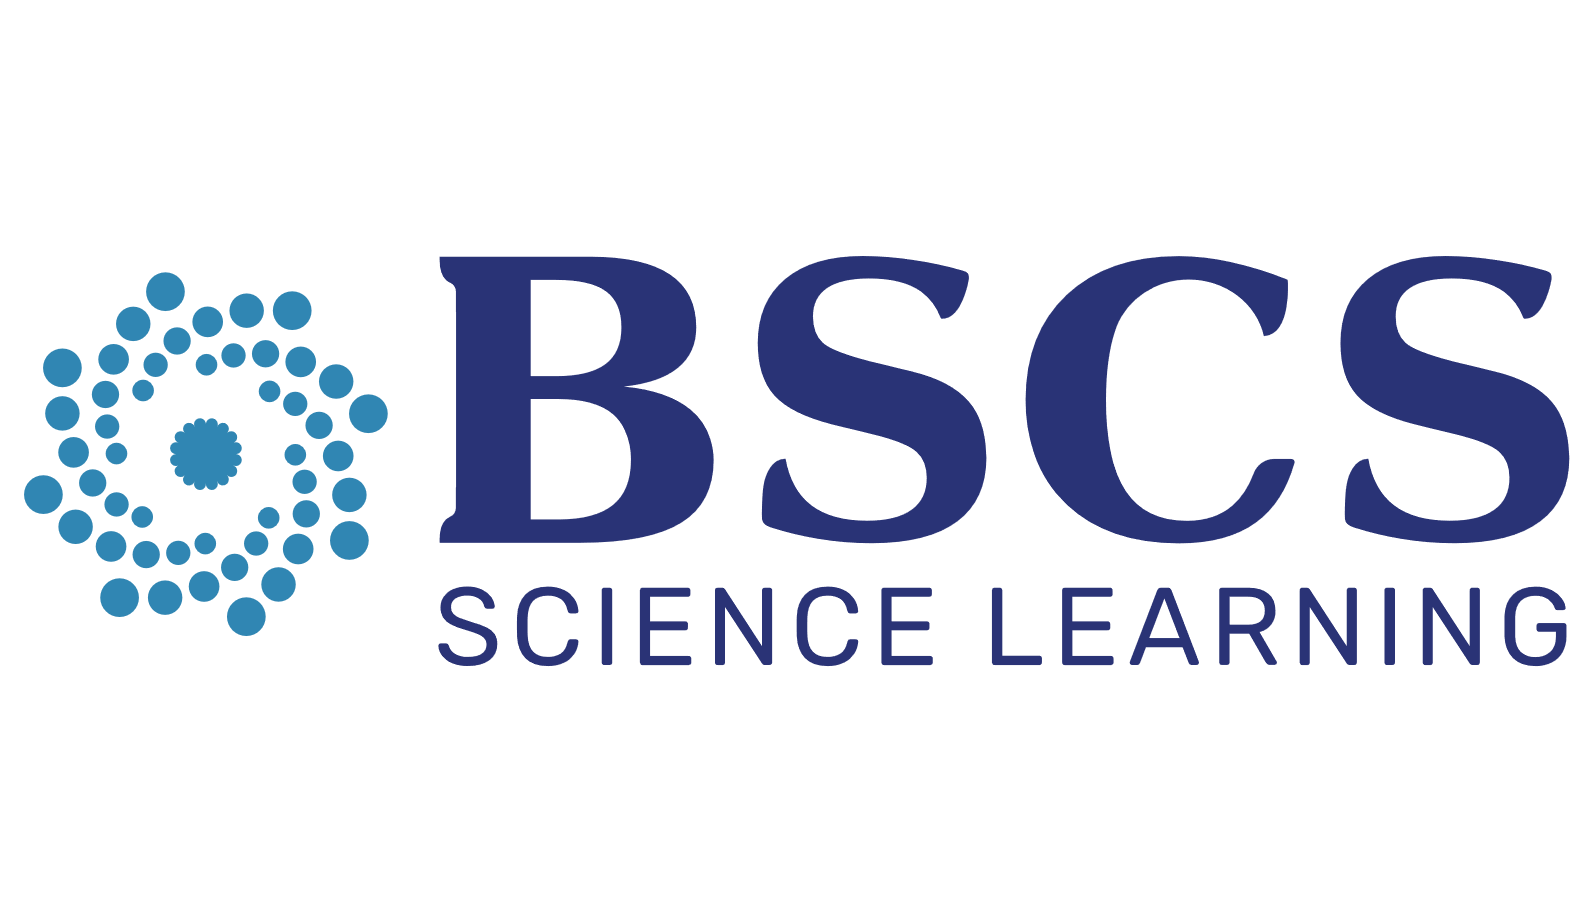 BSCS Science Learning Logo